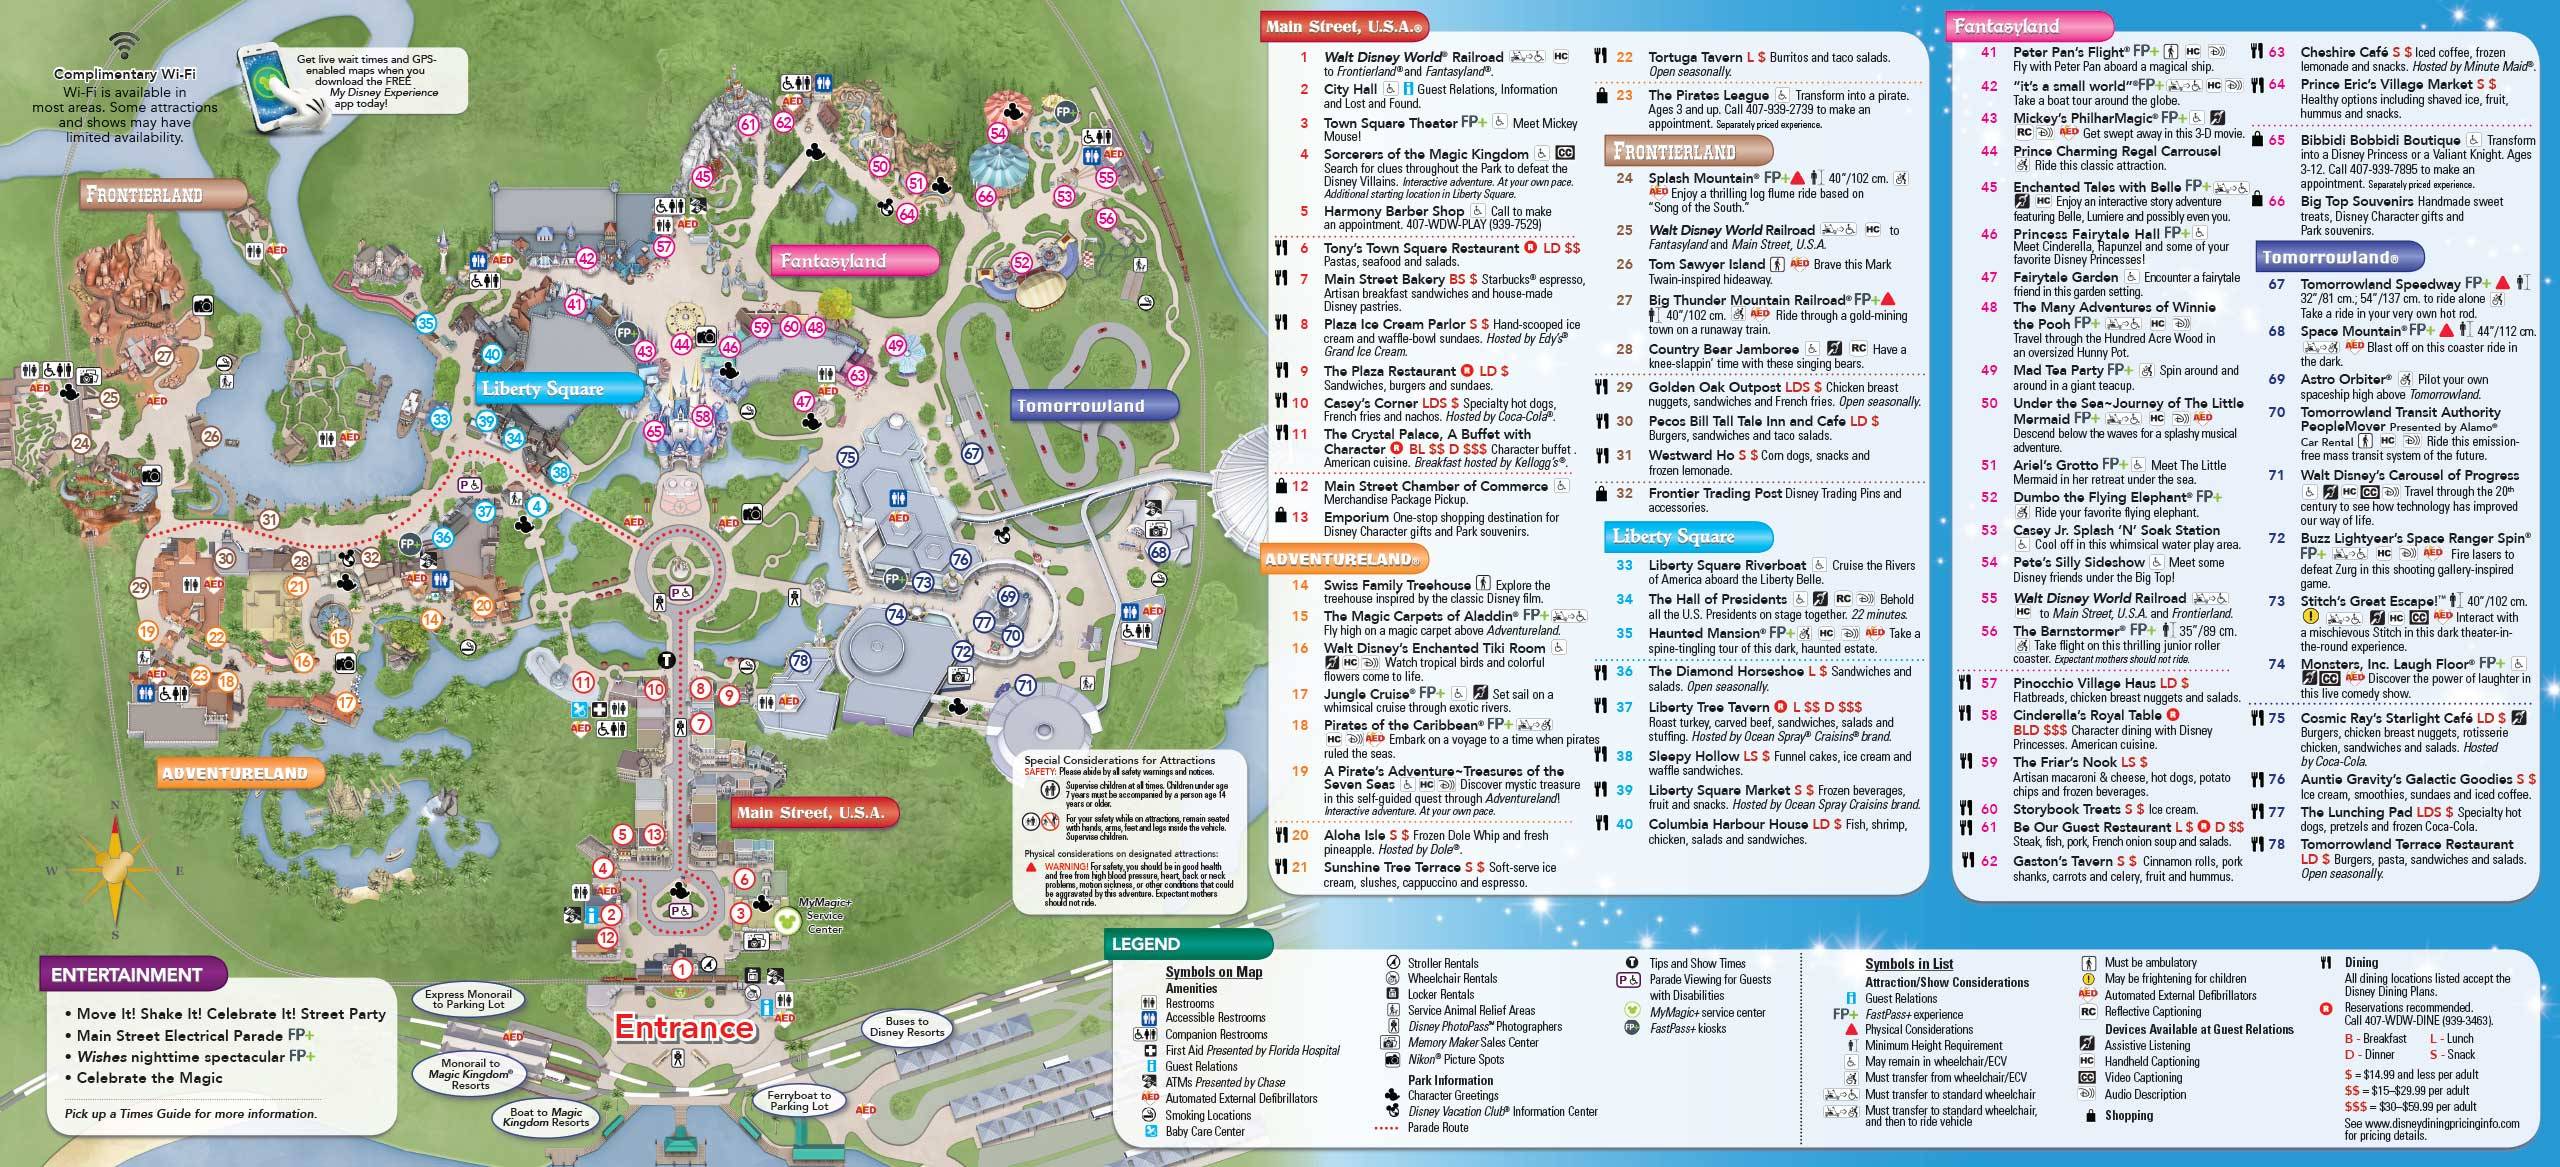 2014 Magic Kingdom guide map with FastPass+ details